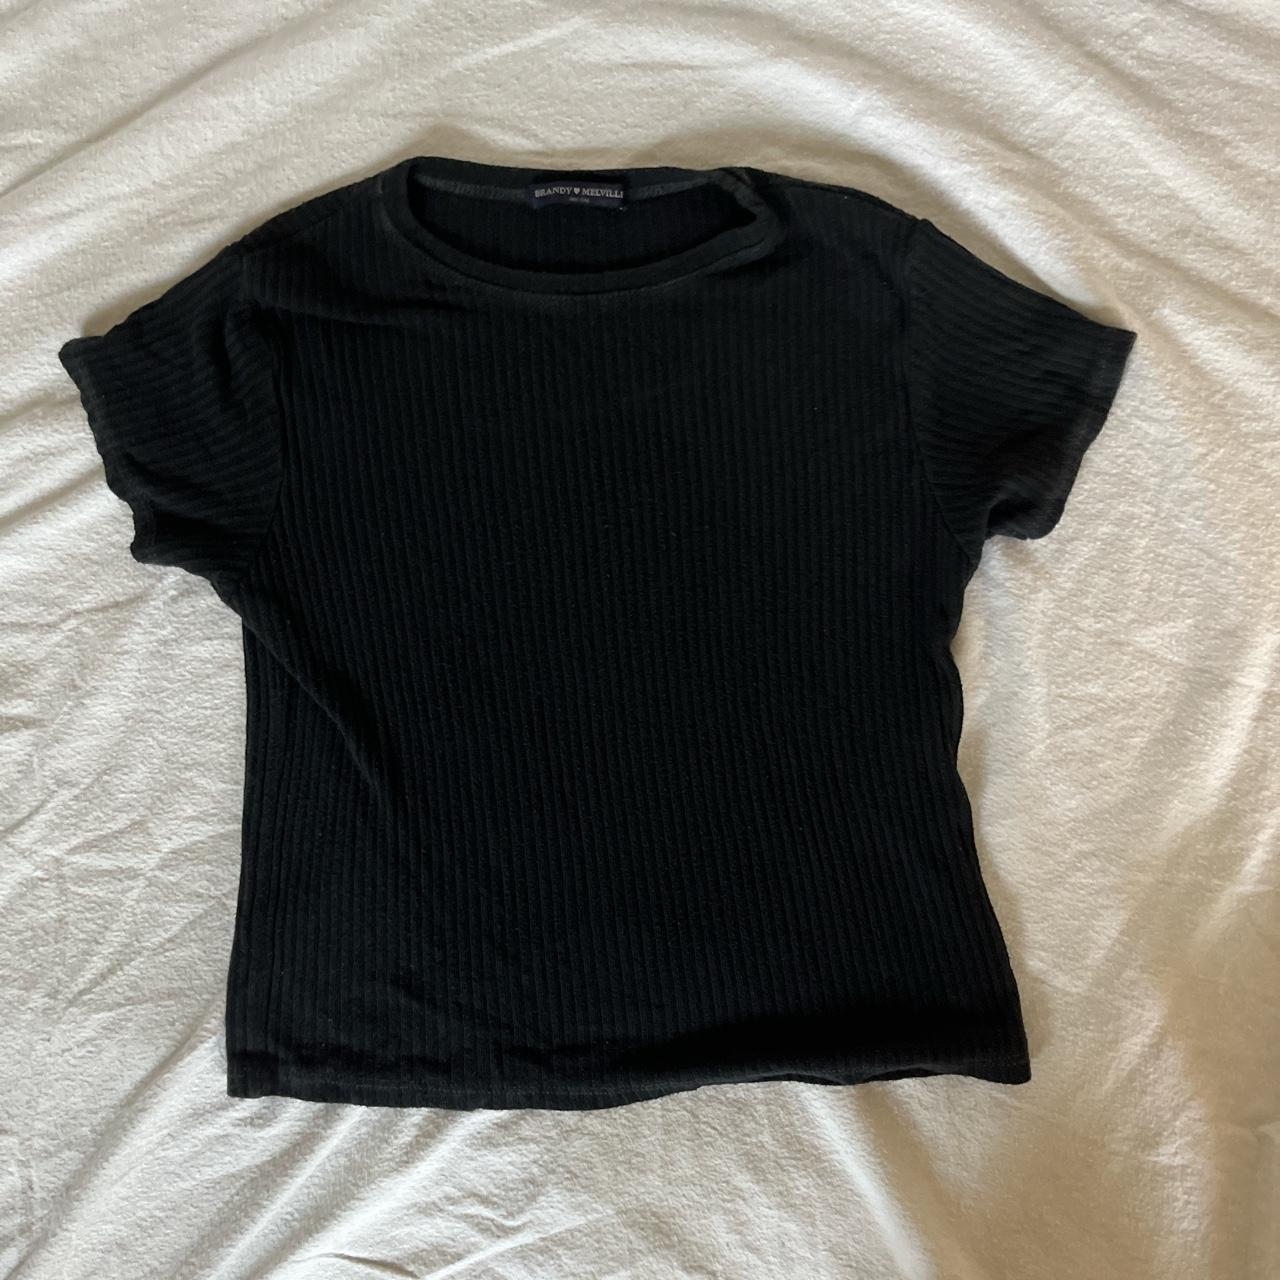 Basic brandy form fitting tee. super soft and... - Depop